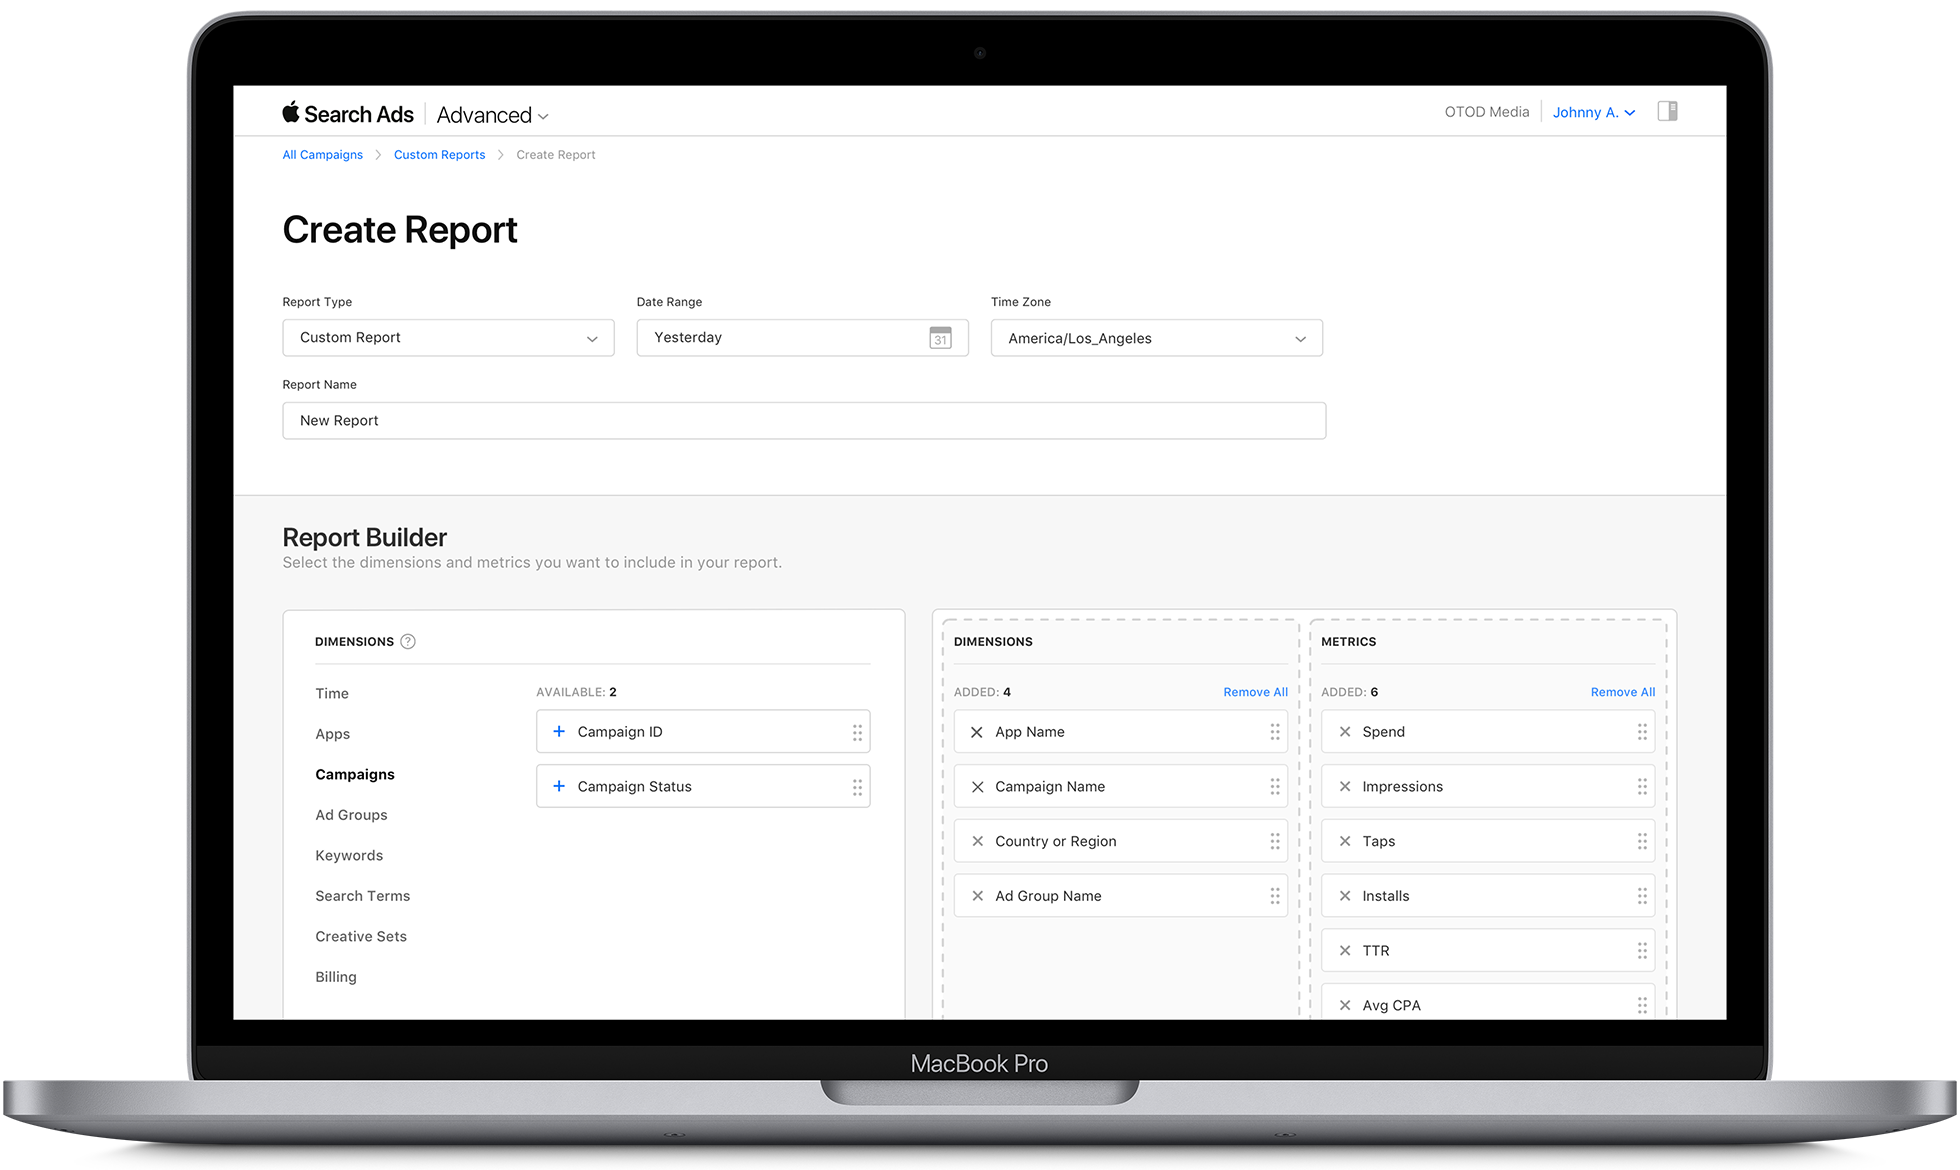 Create report page for custom reports